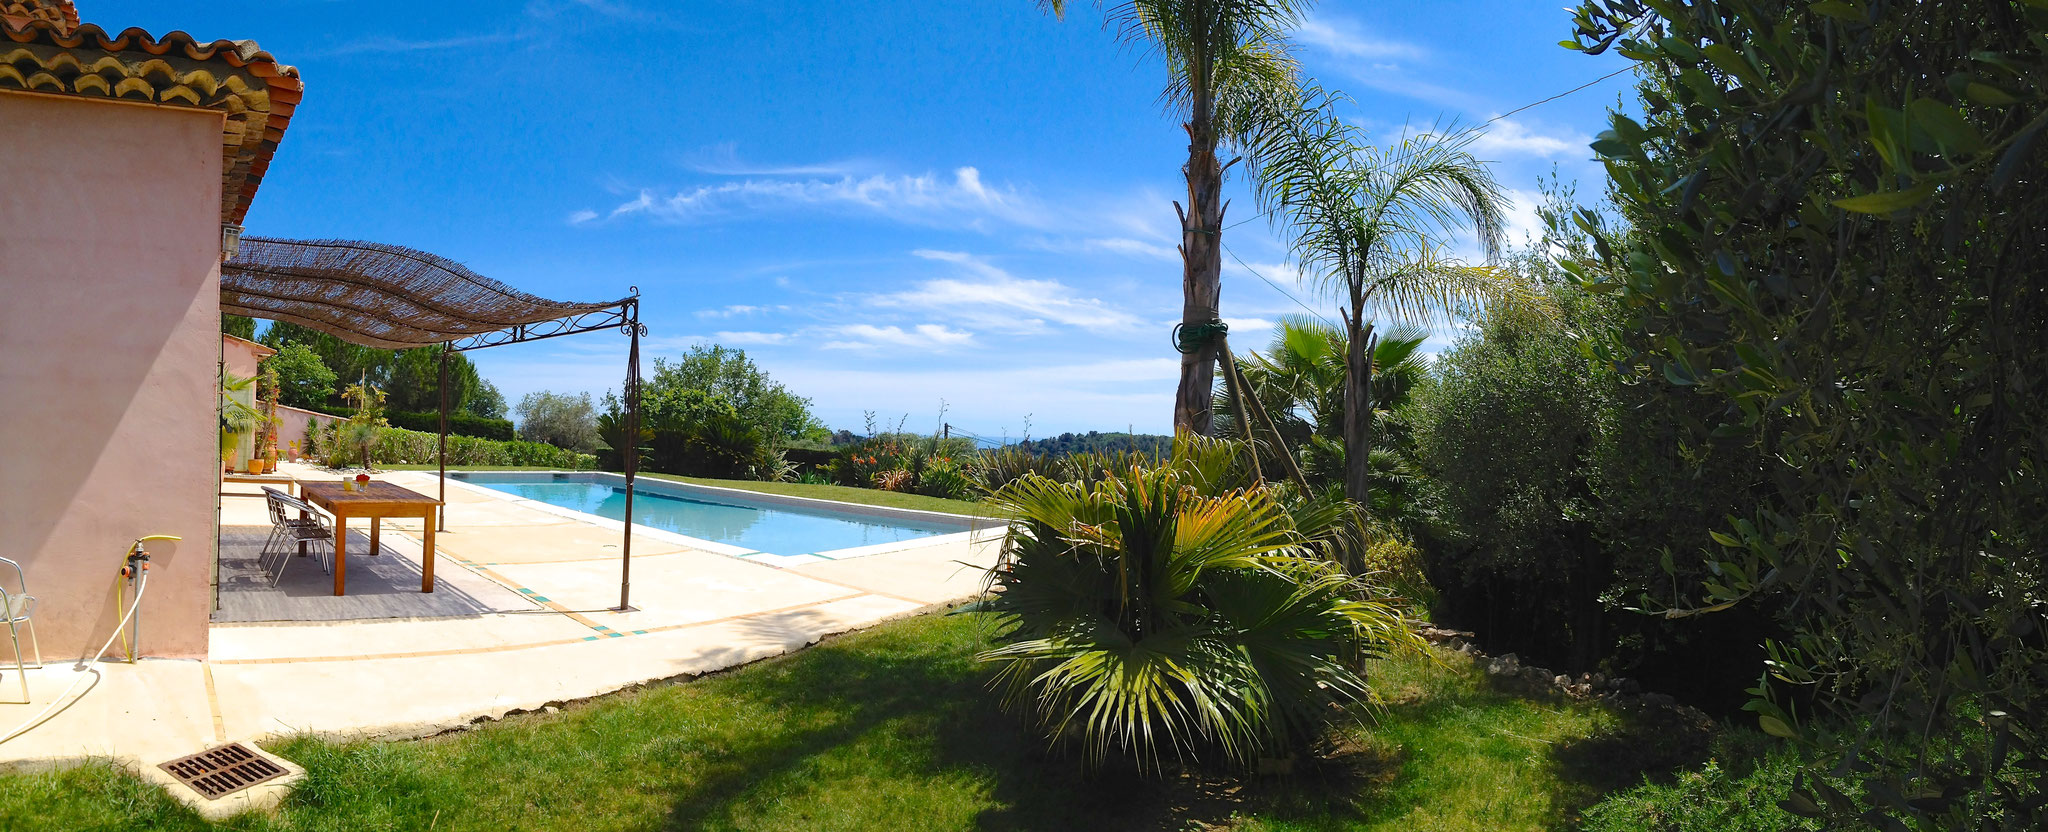 swimming pool garden rent villa holiday letting house in alpes maritimes french riviera france vence antibes nice